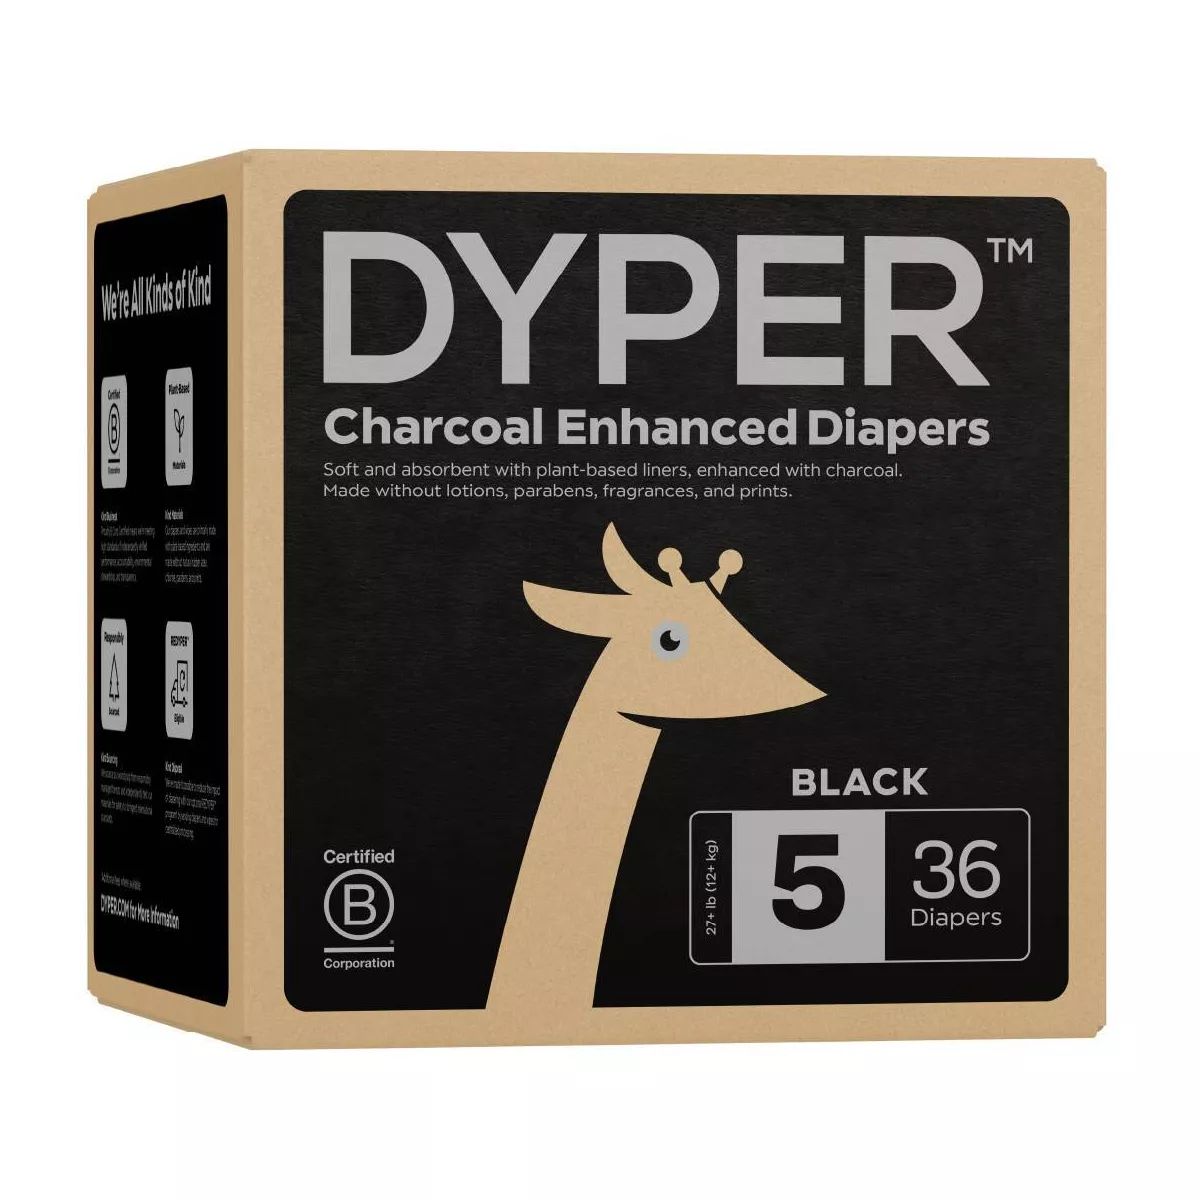 DYPER Charcoal Enhanced Diapers | Target